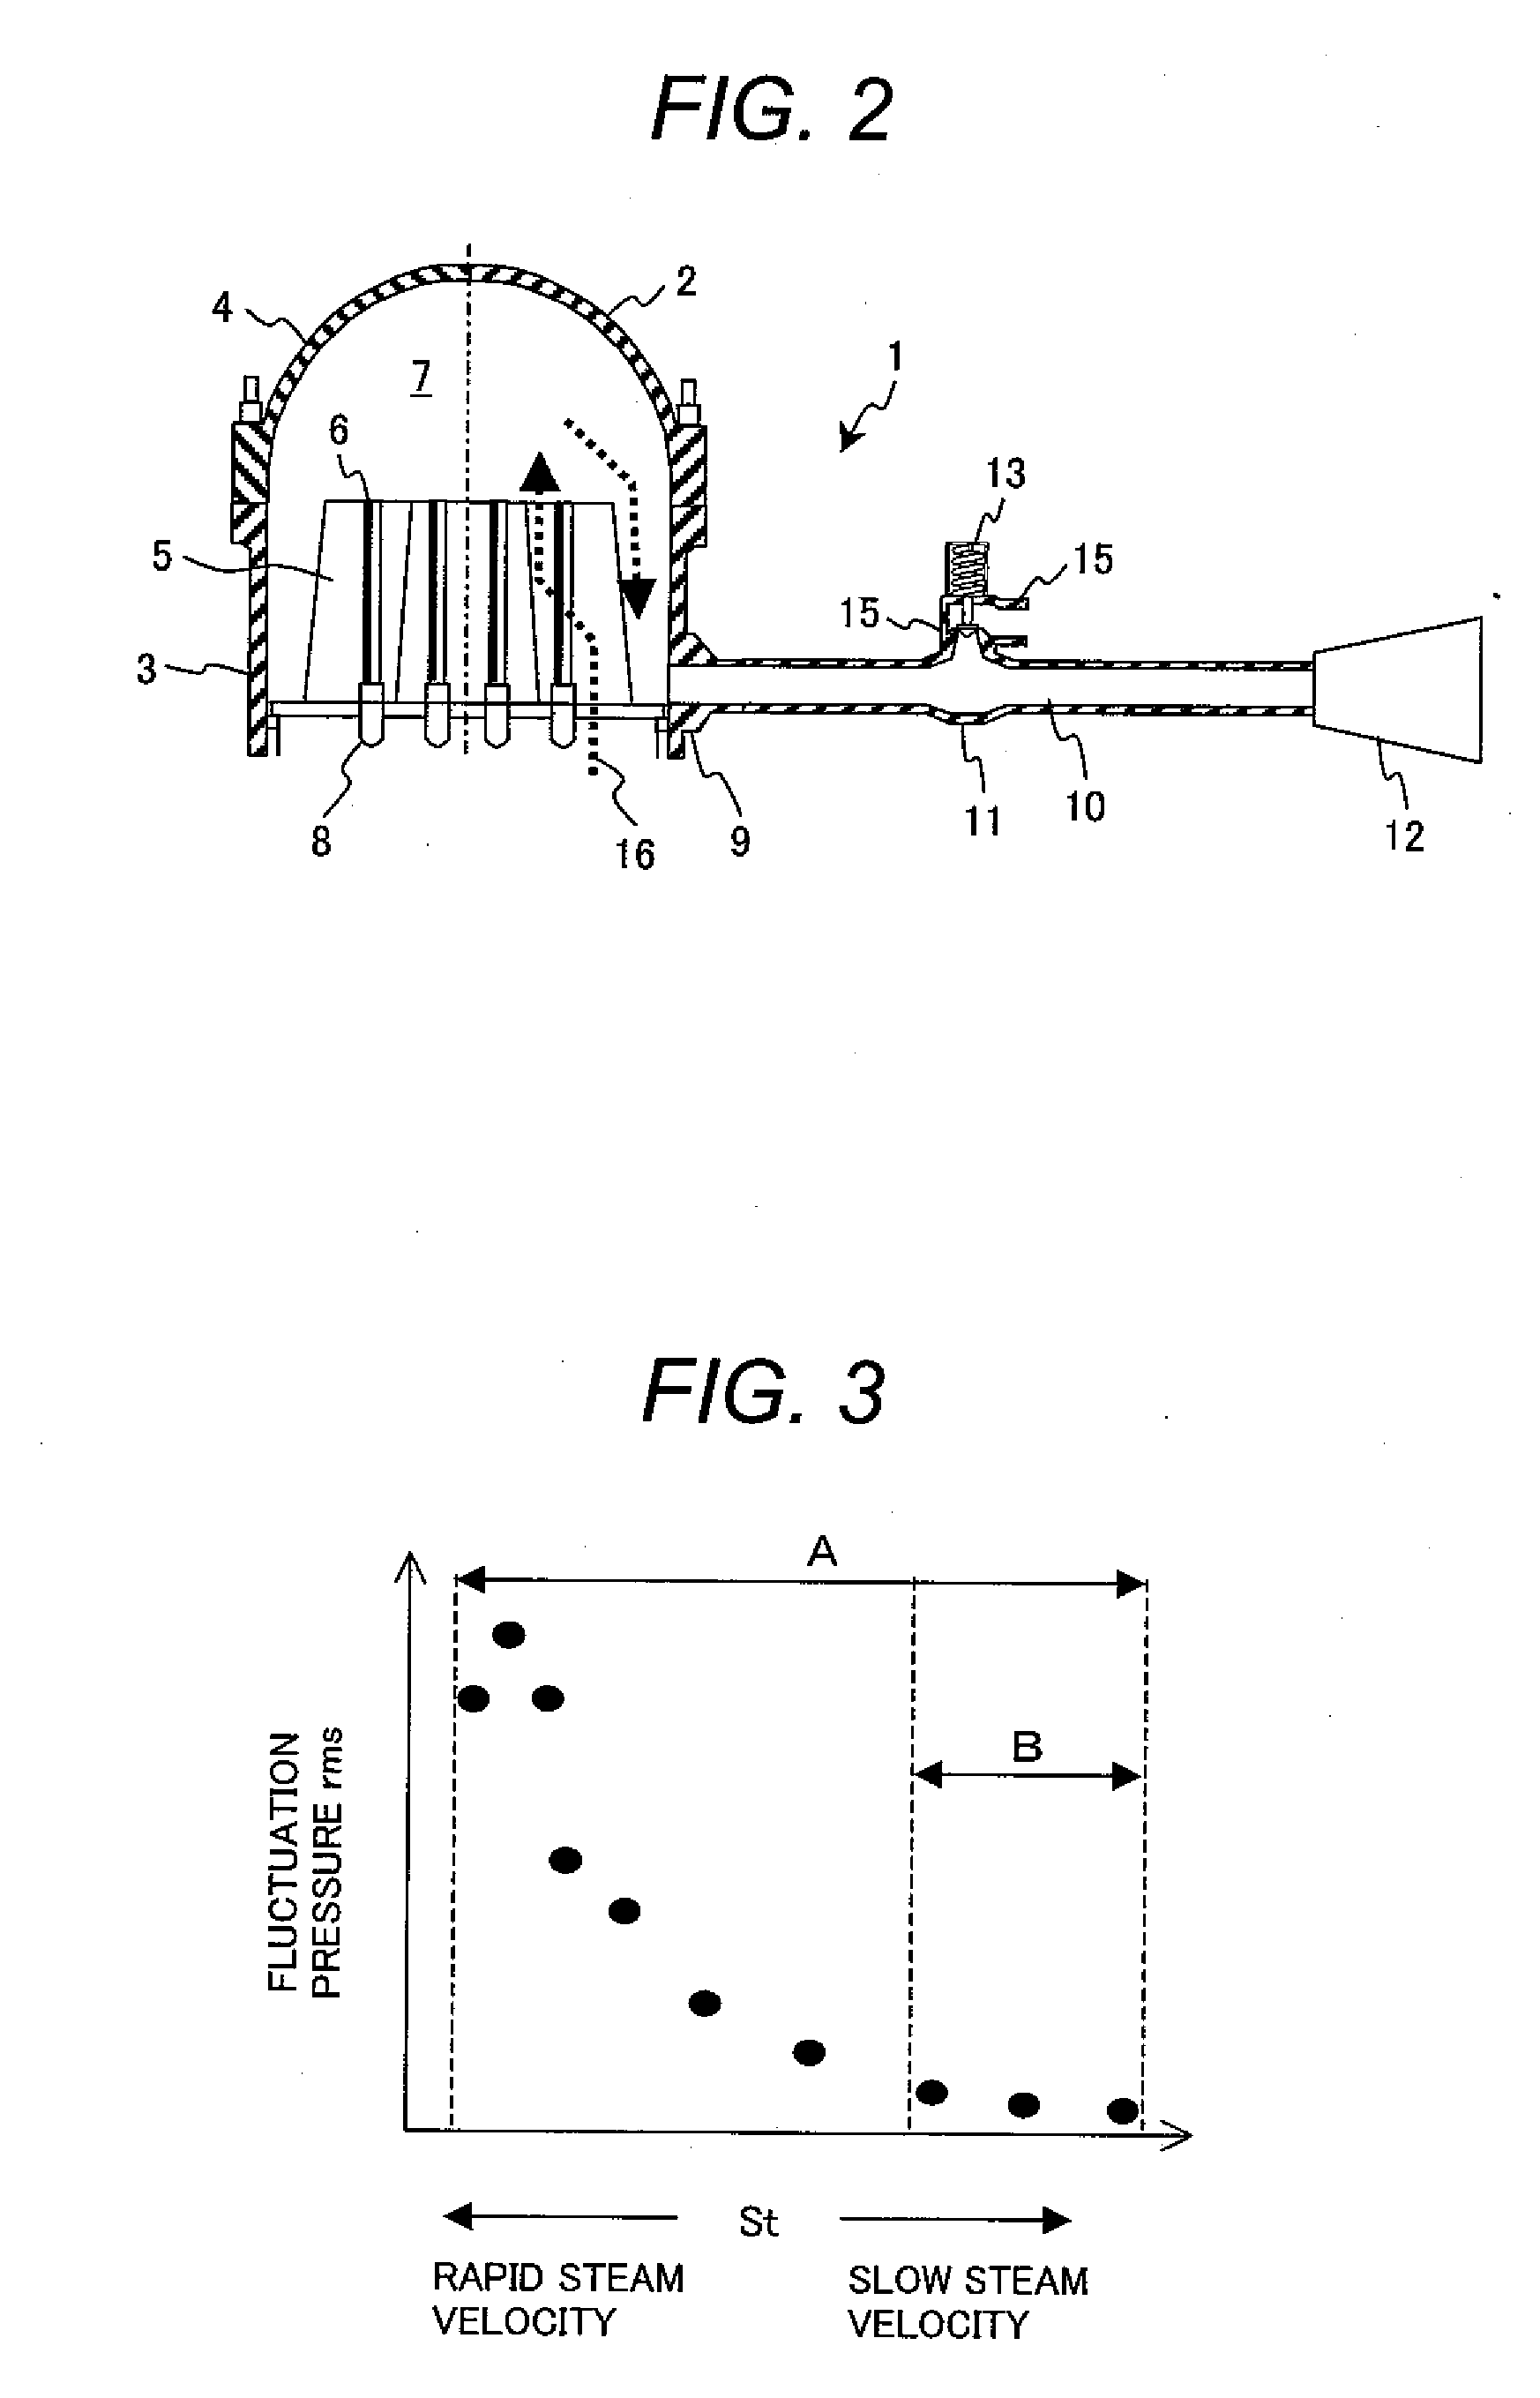 Plant with Piping Mounted on Branch Pipe and Boiling Water Reactor Plant